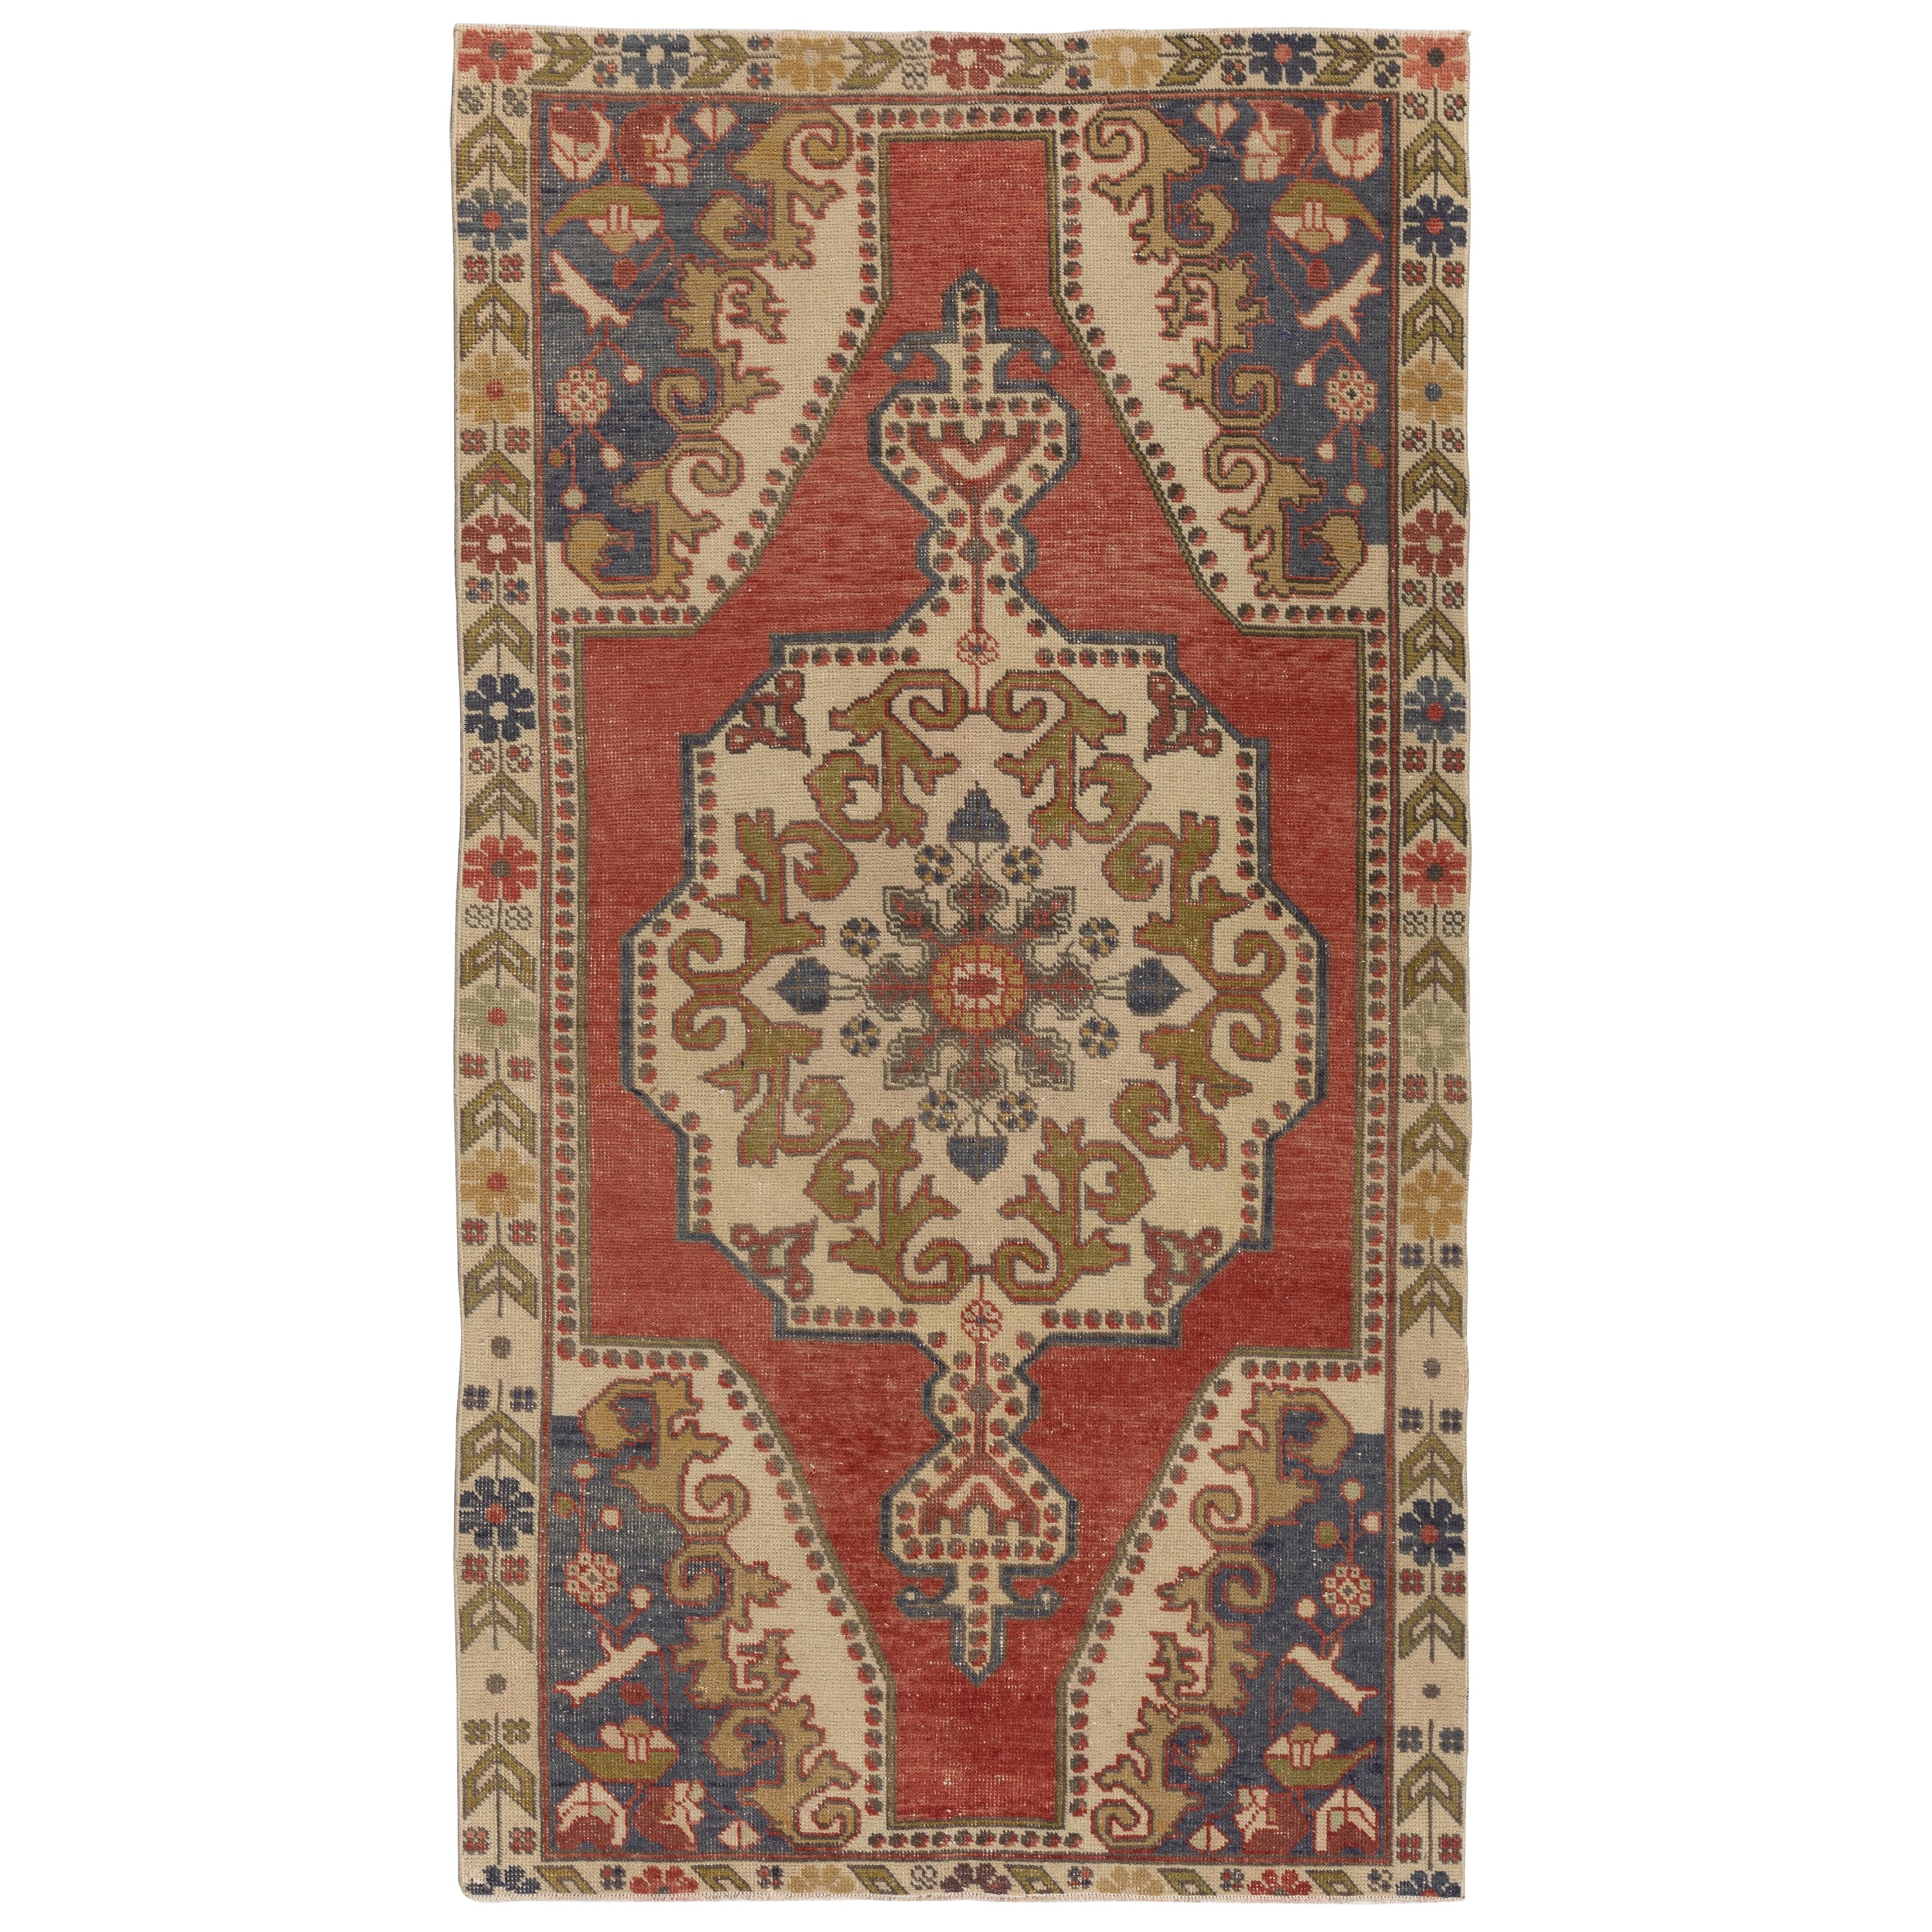 4.4x7.8 Ft Traditional Handknotted Village Rug, Vintage Tribal Carpet, 100% Wool For Sale